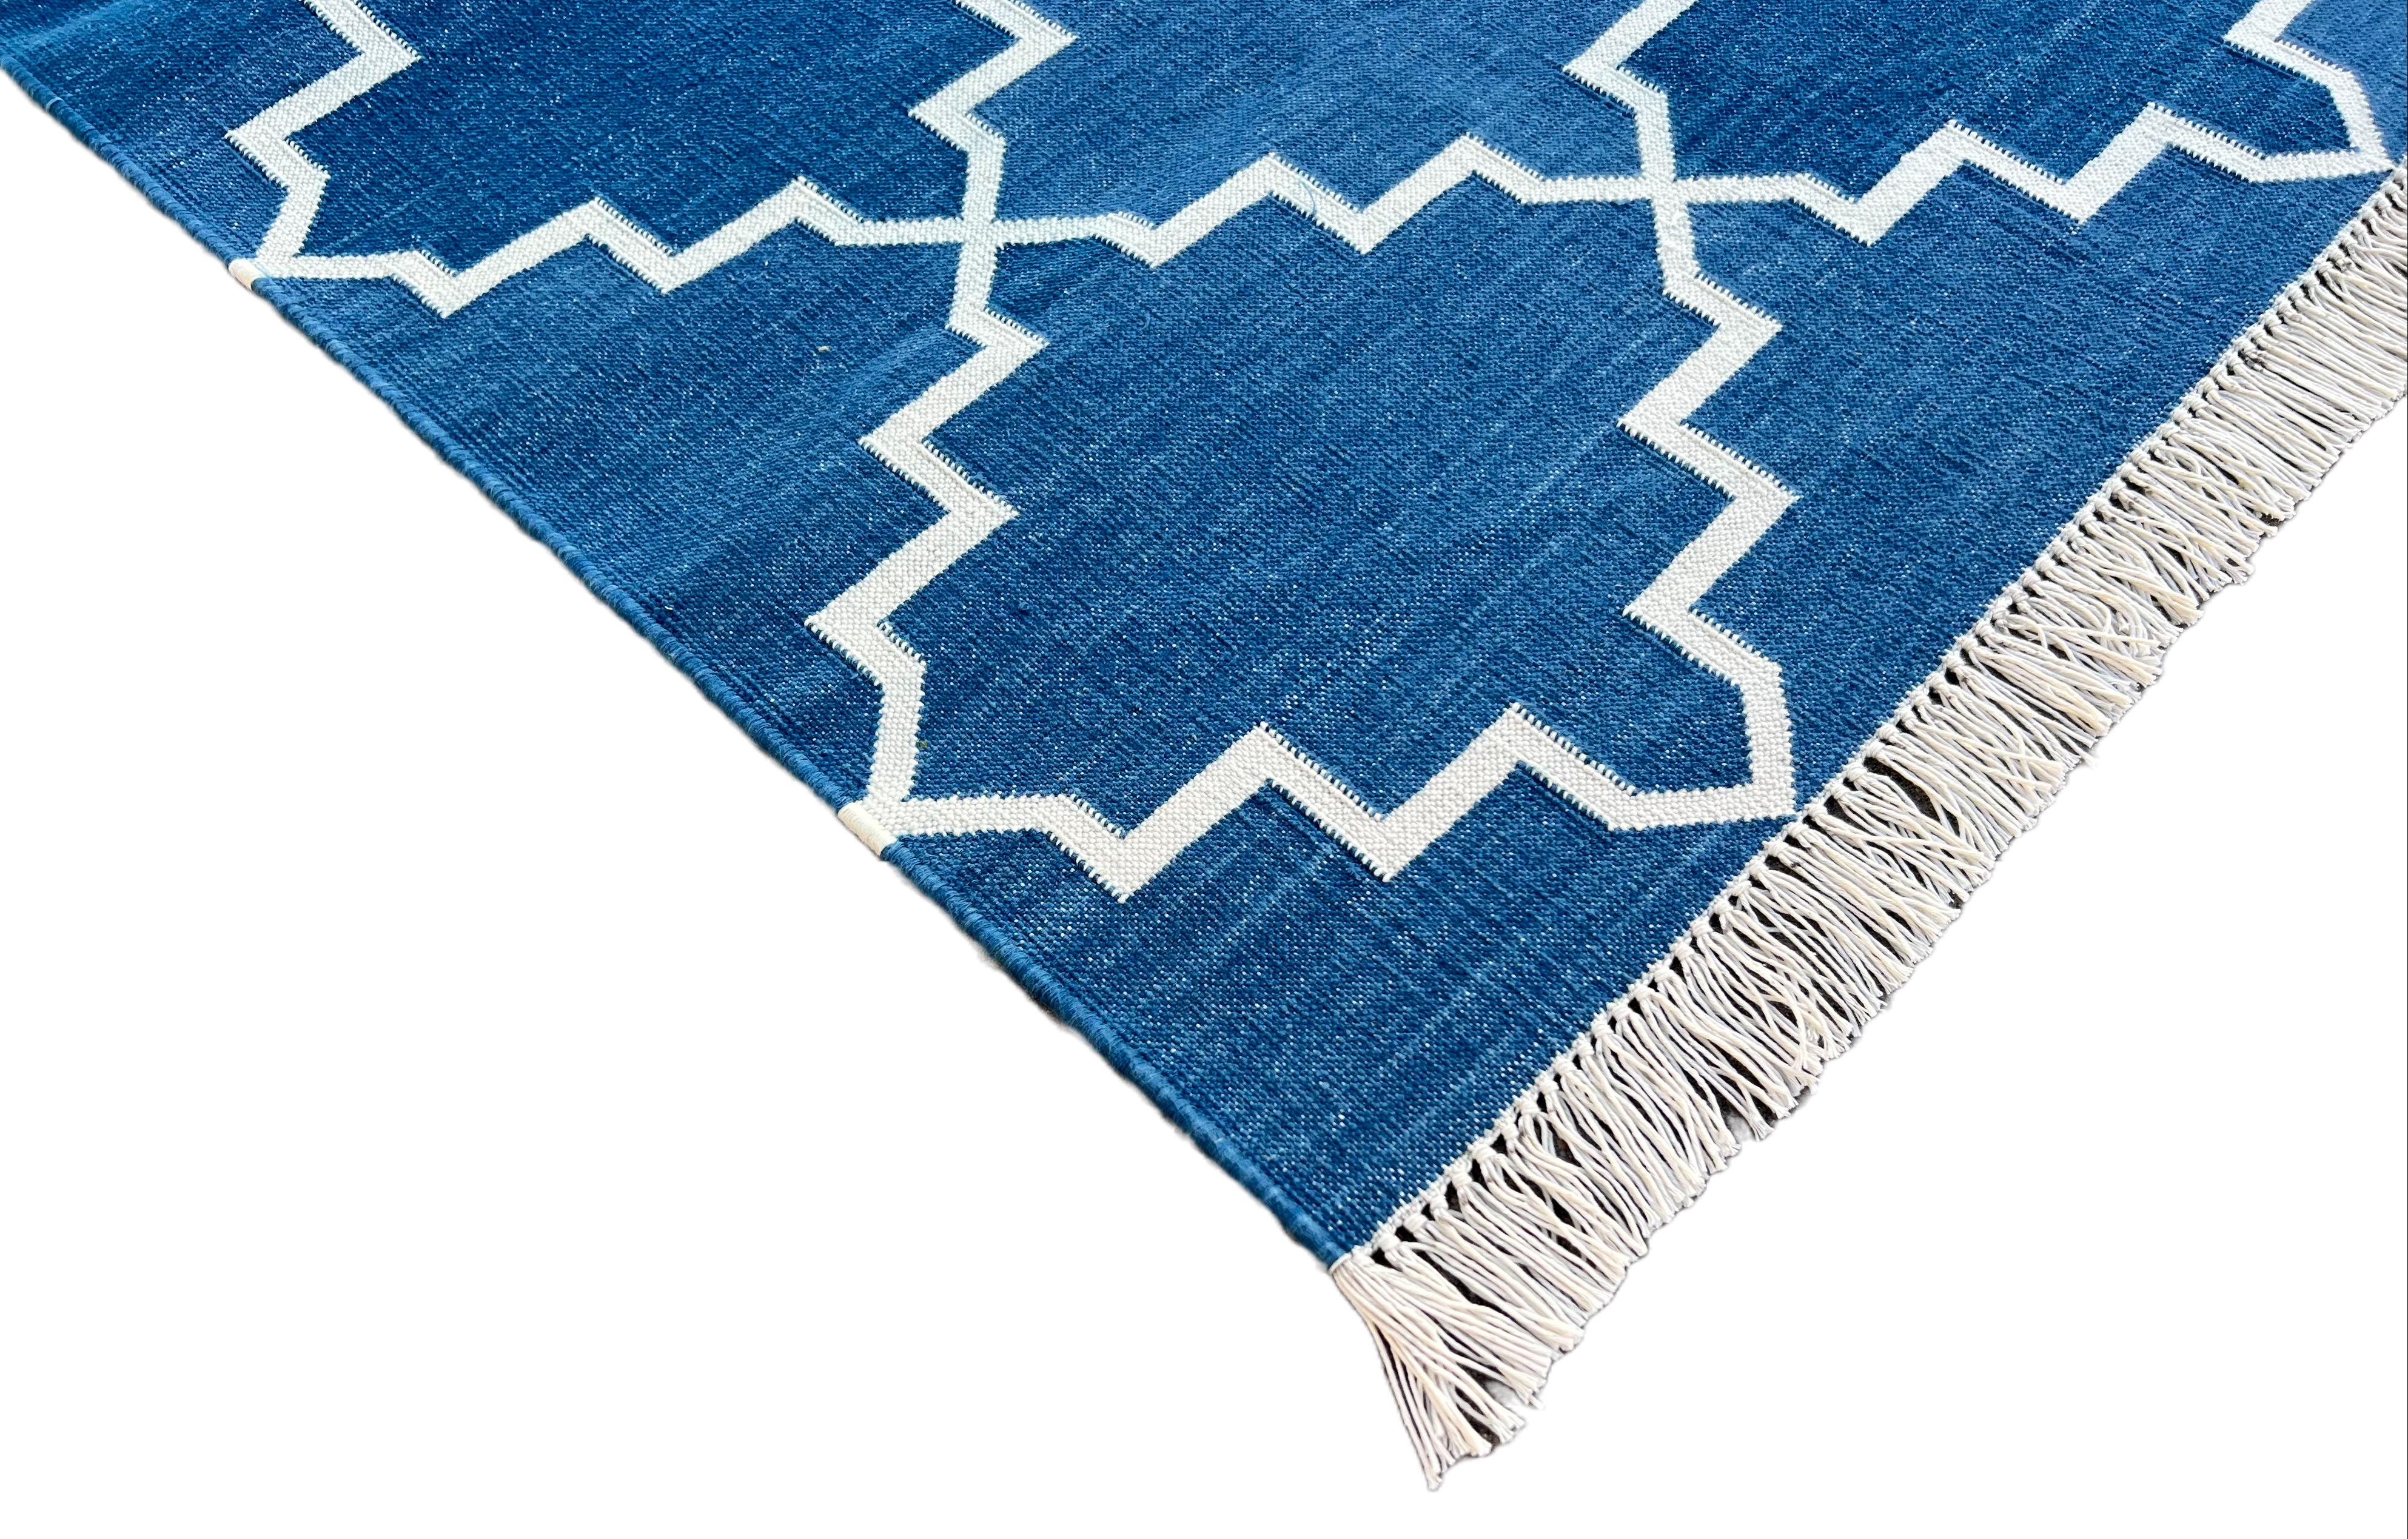 Cotton Natural Vegetable Dyed, Green And Blue Striped Indian Dhurrie Runner-2x8 feet (60x240cm)
These special flat-weave dhurries are hand-woven with 15 ply 100% cotton yarn. Due to the special manufacturing techniques used to create our rugs, the